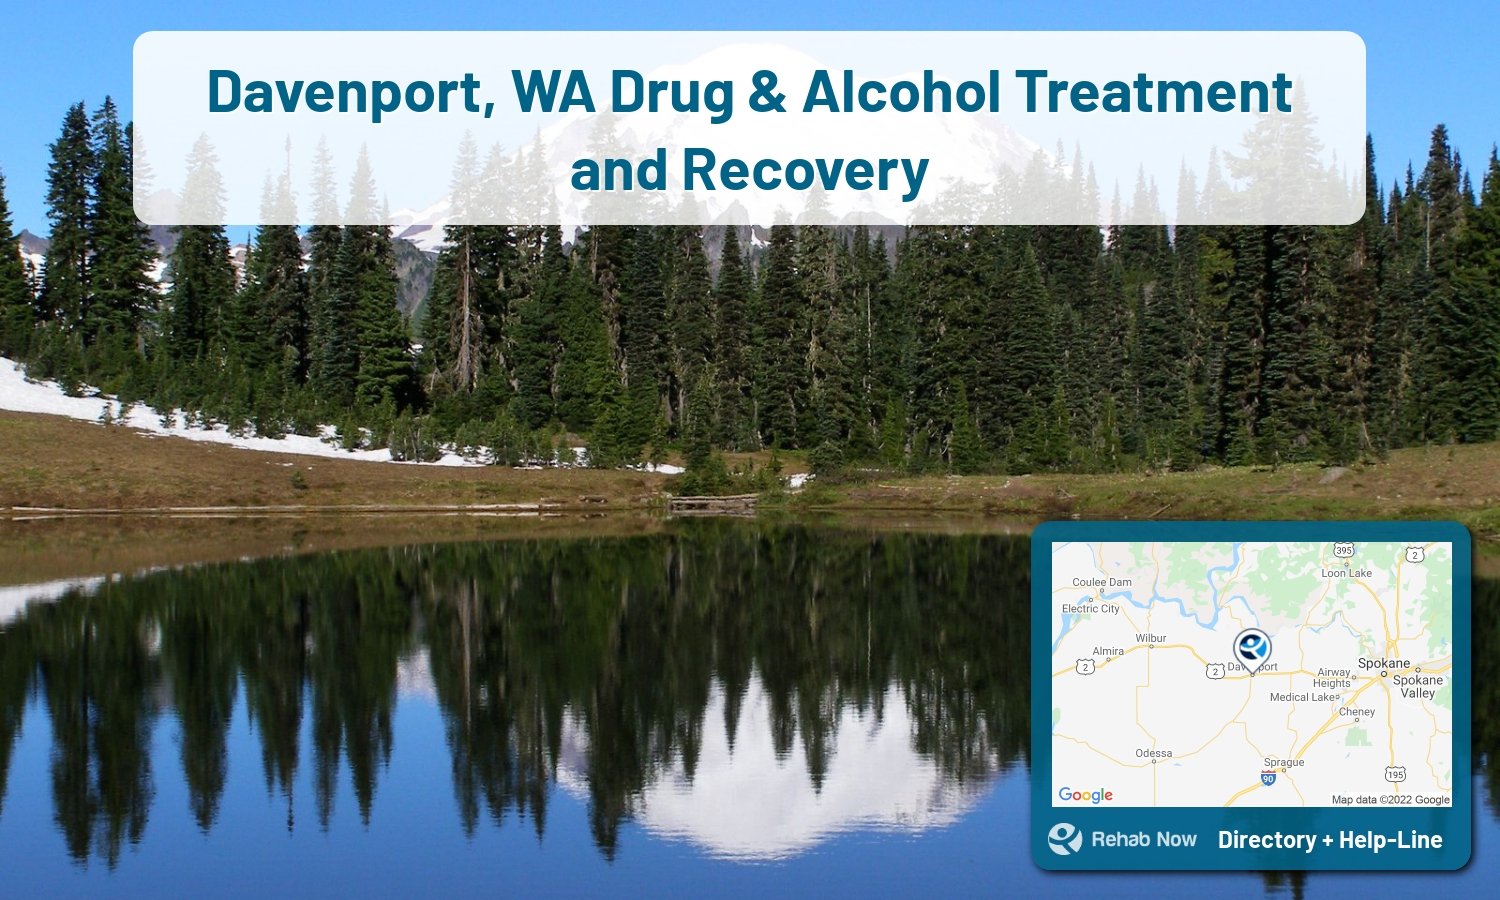 List of alcohol and drug treatment centers near you in Davenport, Washington. Research certifications, programs, methods, pricing, and more.